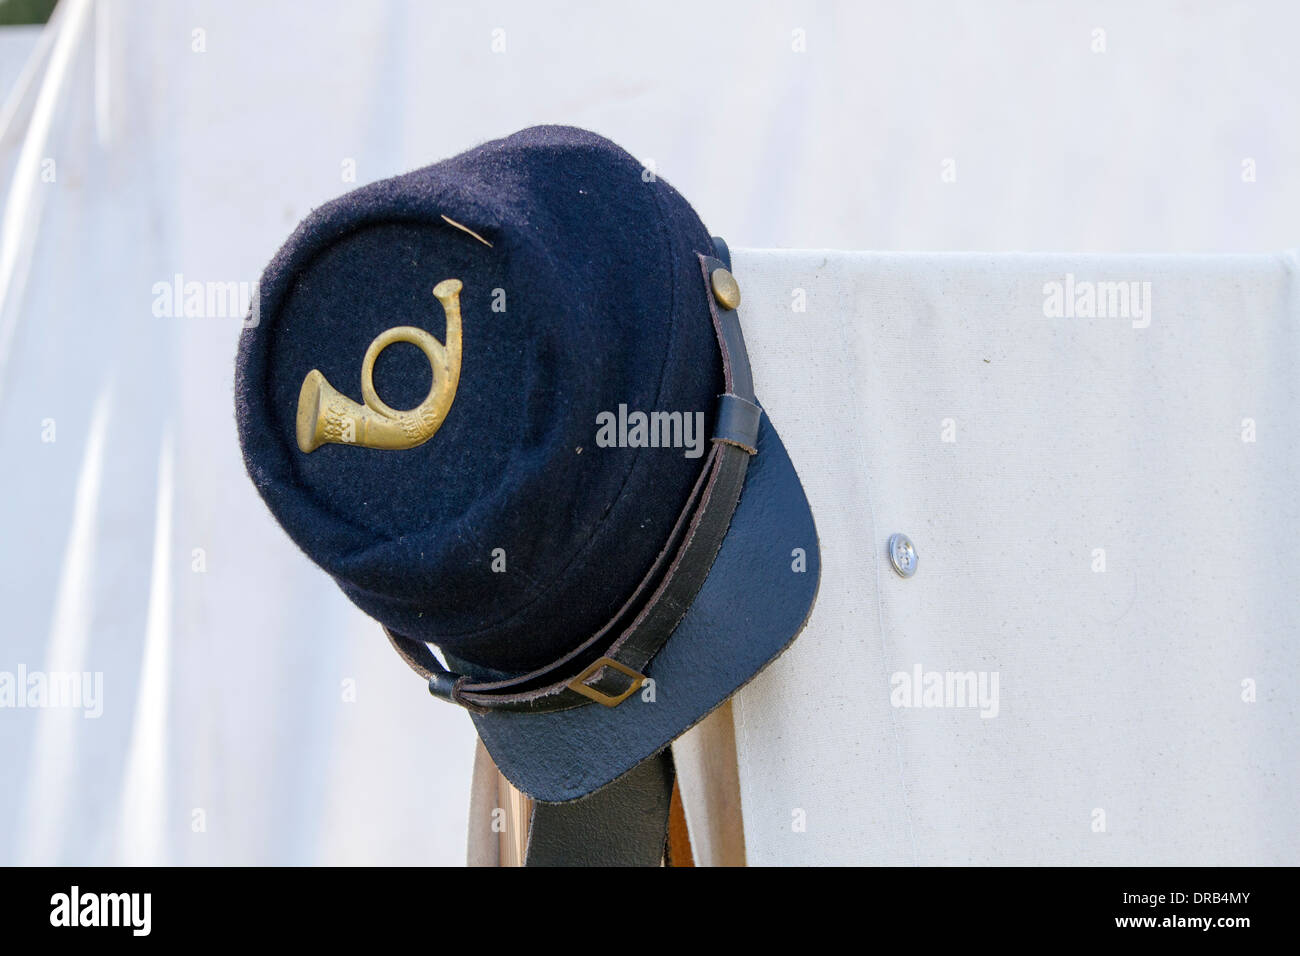 Union army cap worn by fife and drum corp Stock Photo